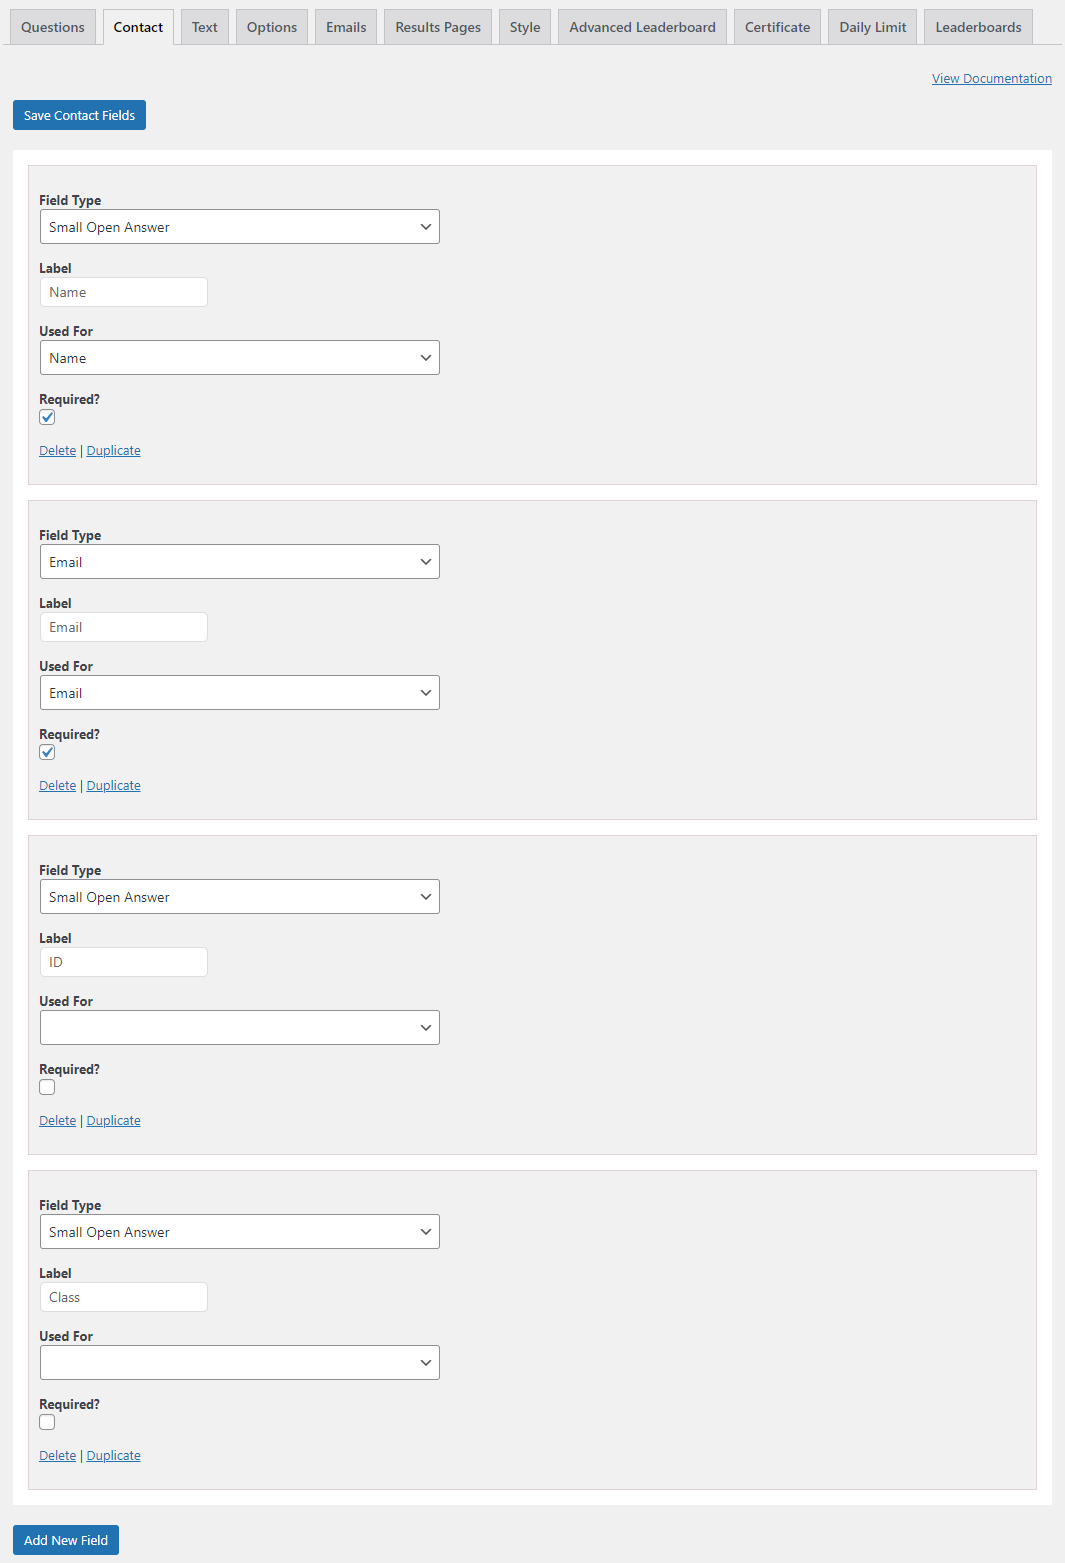 Timer based Online Exam in WordPress - Enable Contact Form